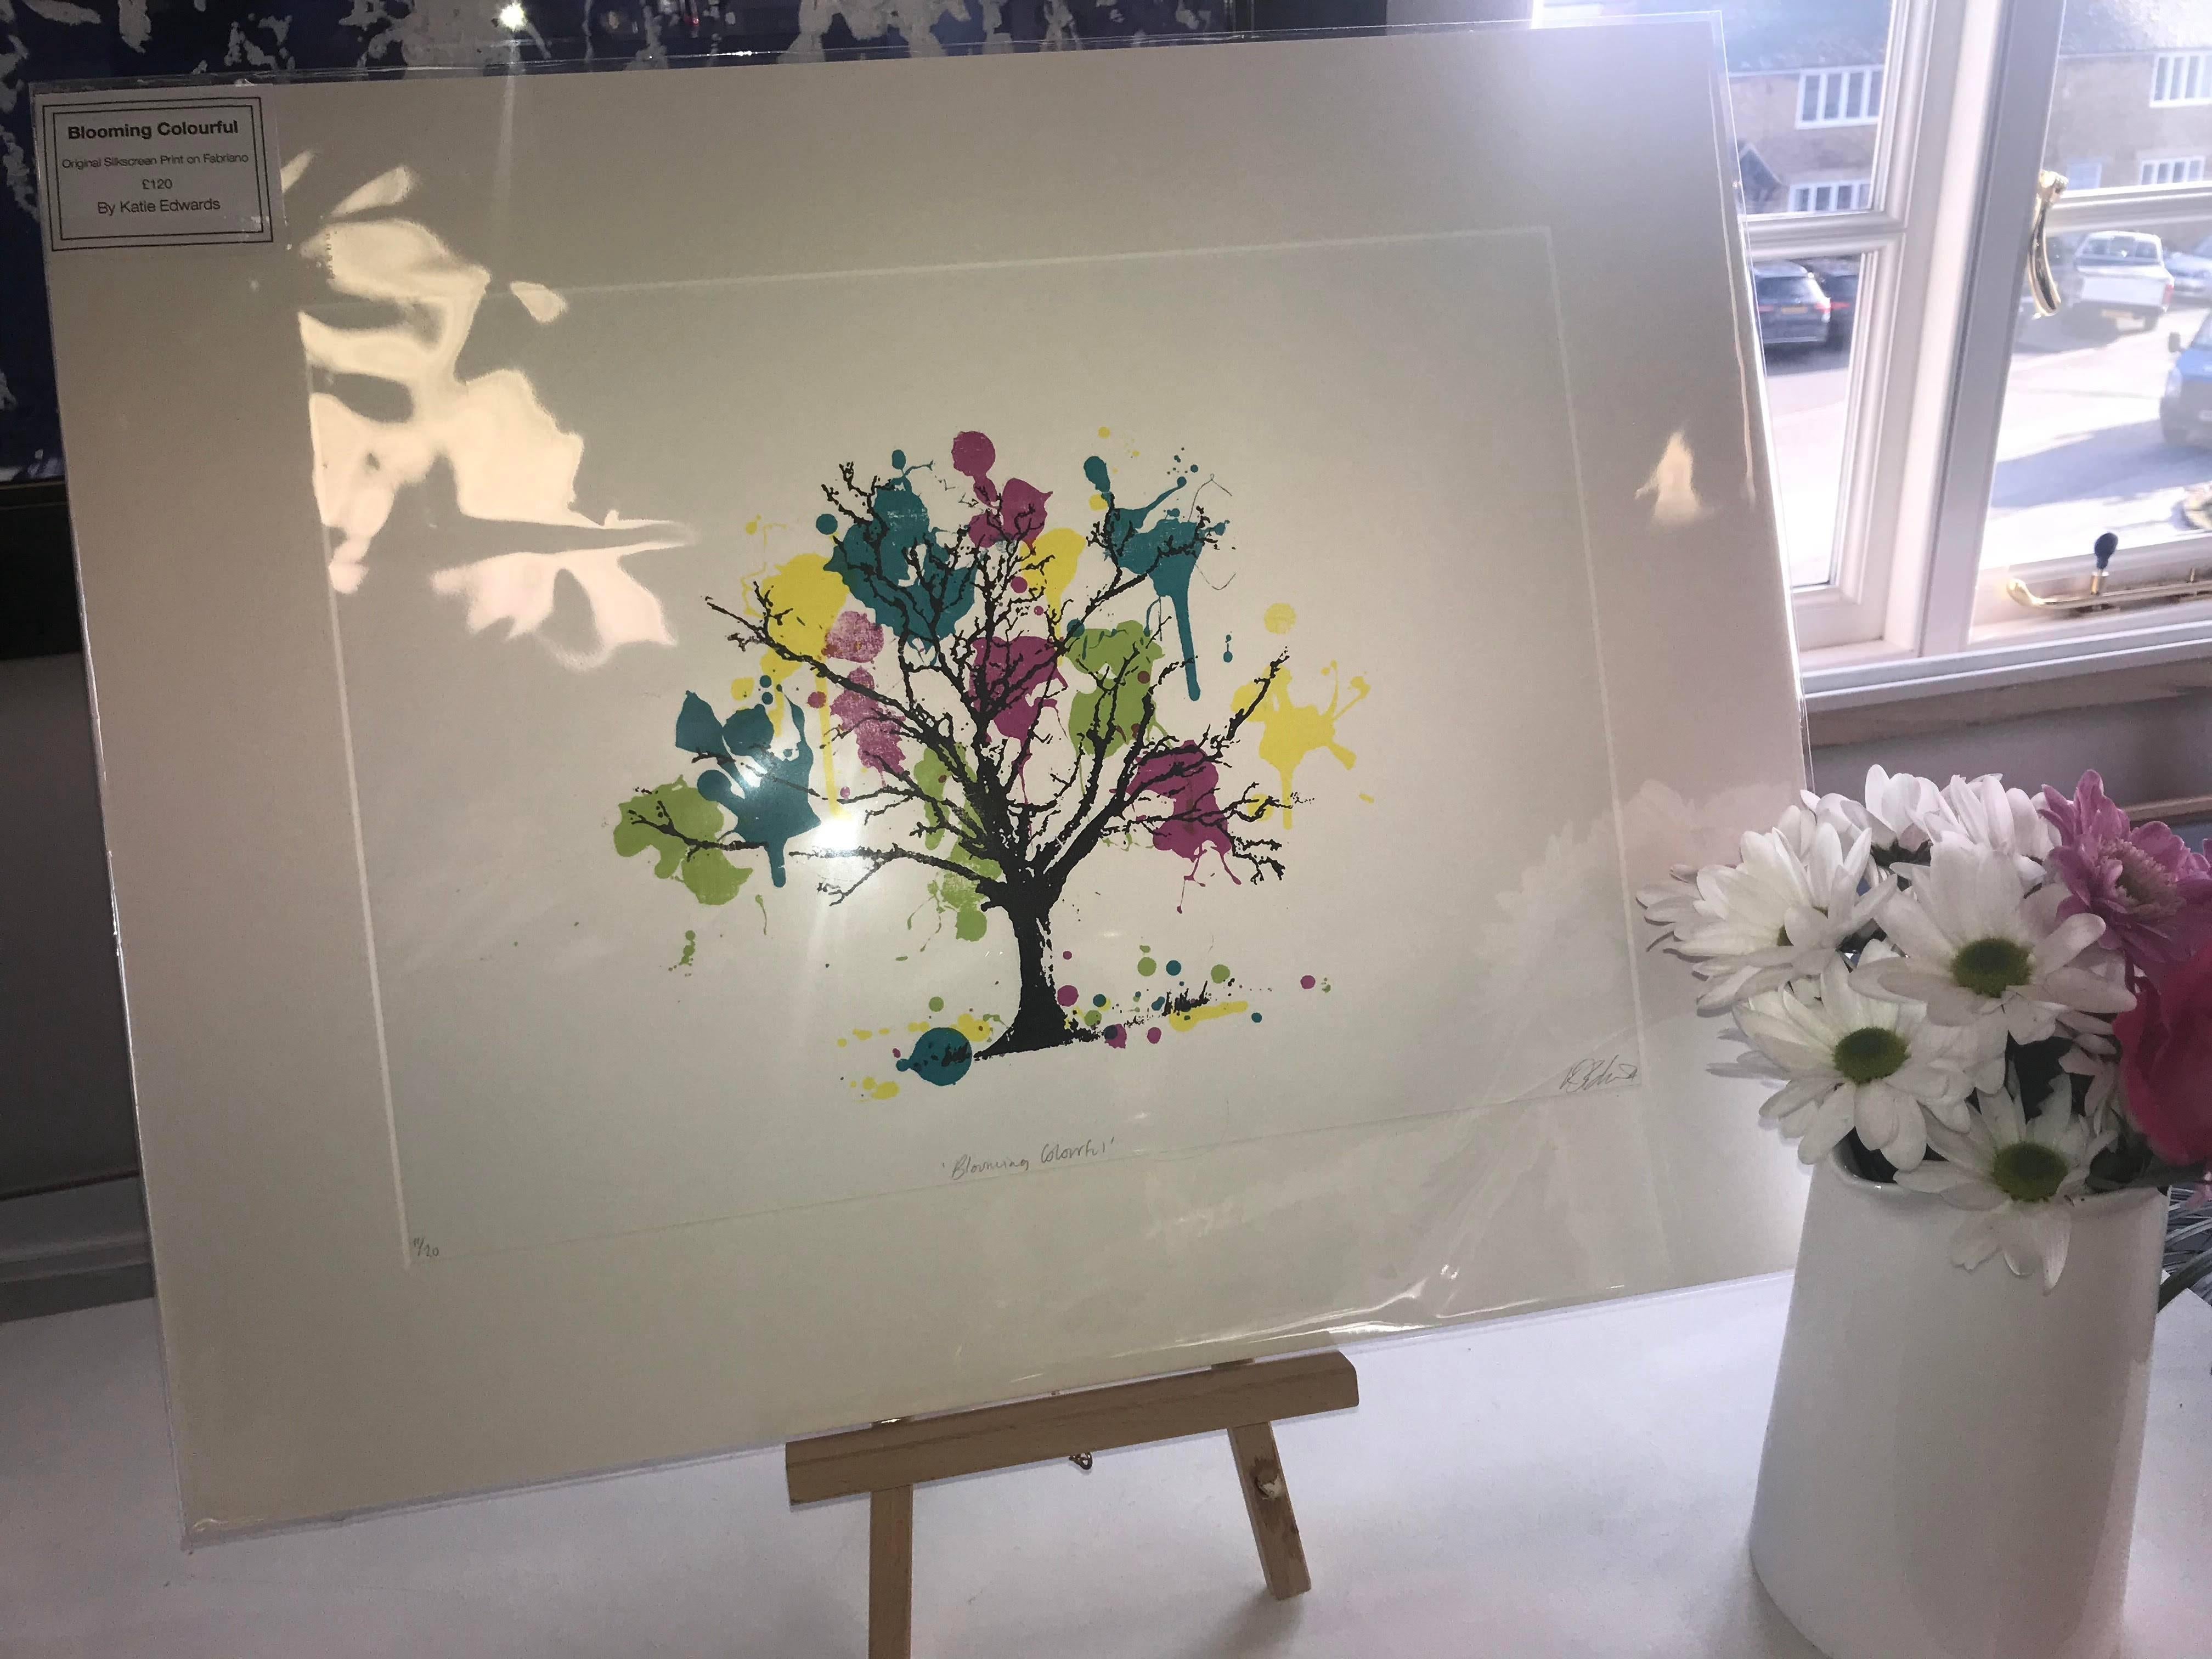 ‘Blooming Colourful’ Original Handmade Silk Screen Print by the illustrator and artist: Katie Edwards.

A fun, colourful and vibrant illustration of a tree with paint splattered flowers. A strong graphic image with symbolic representation of the